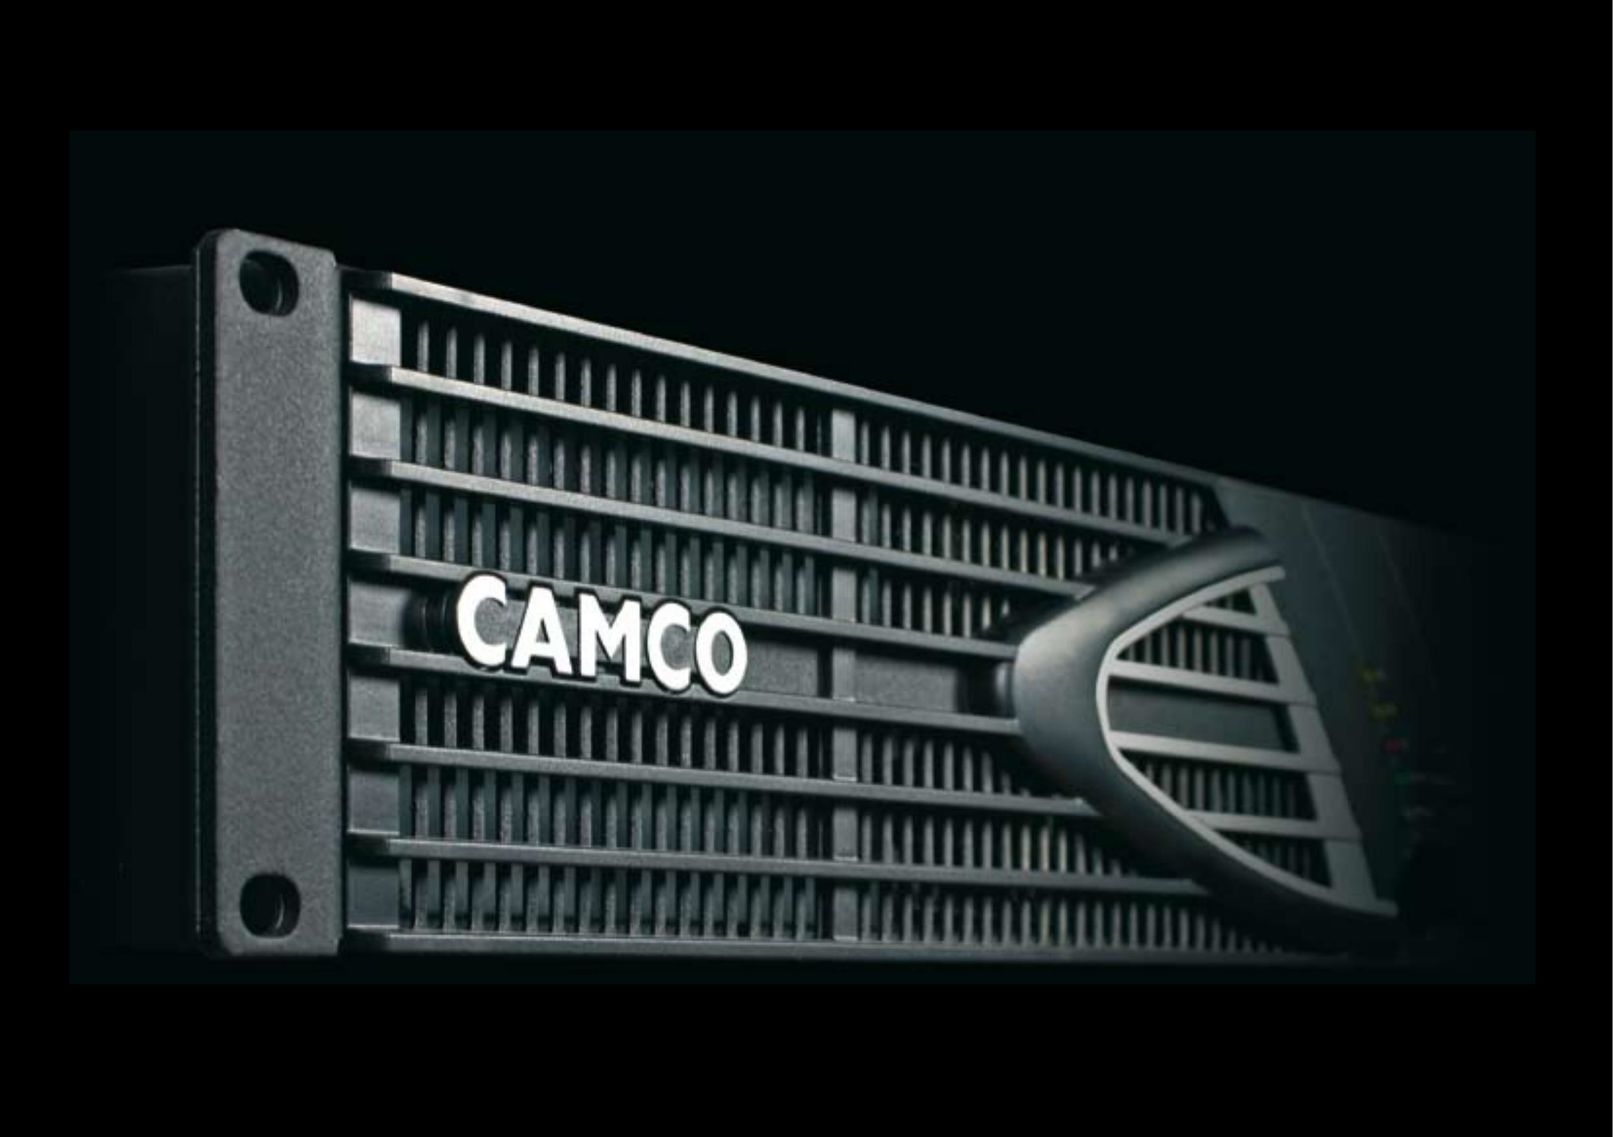 Camco P.8 Series Stereo Amplifier User Manual